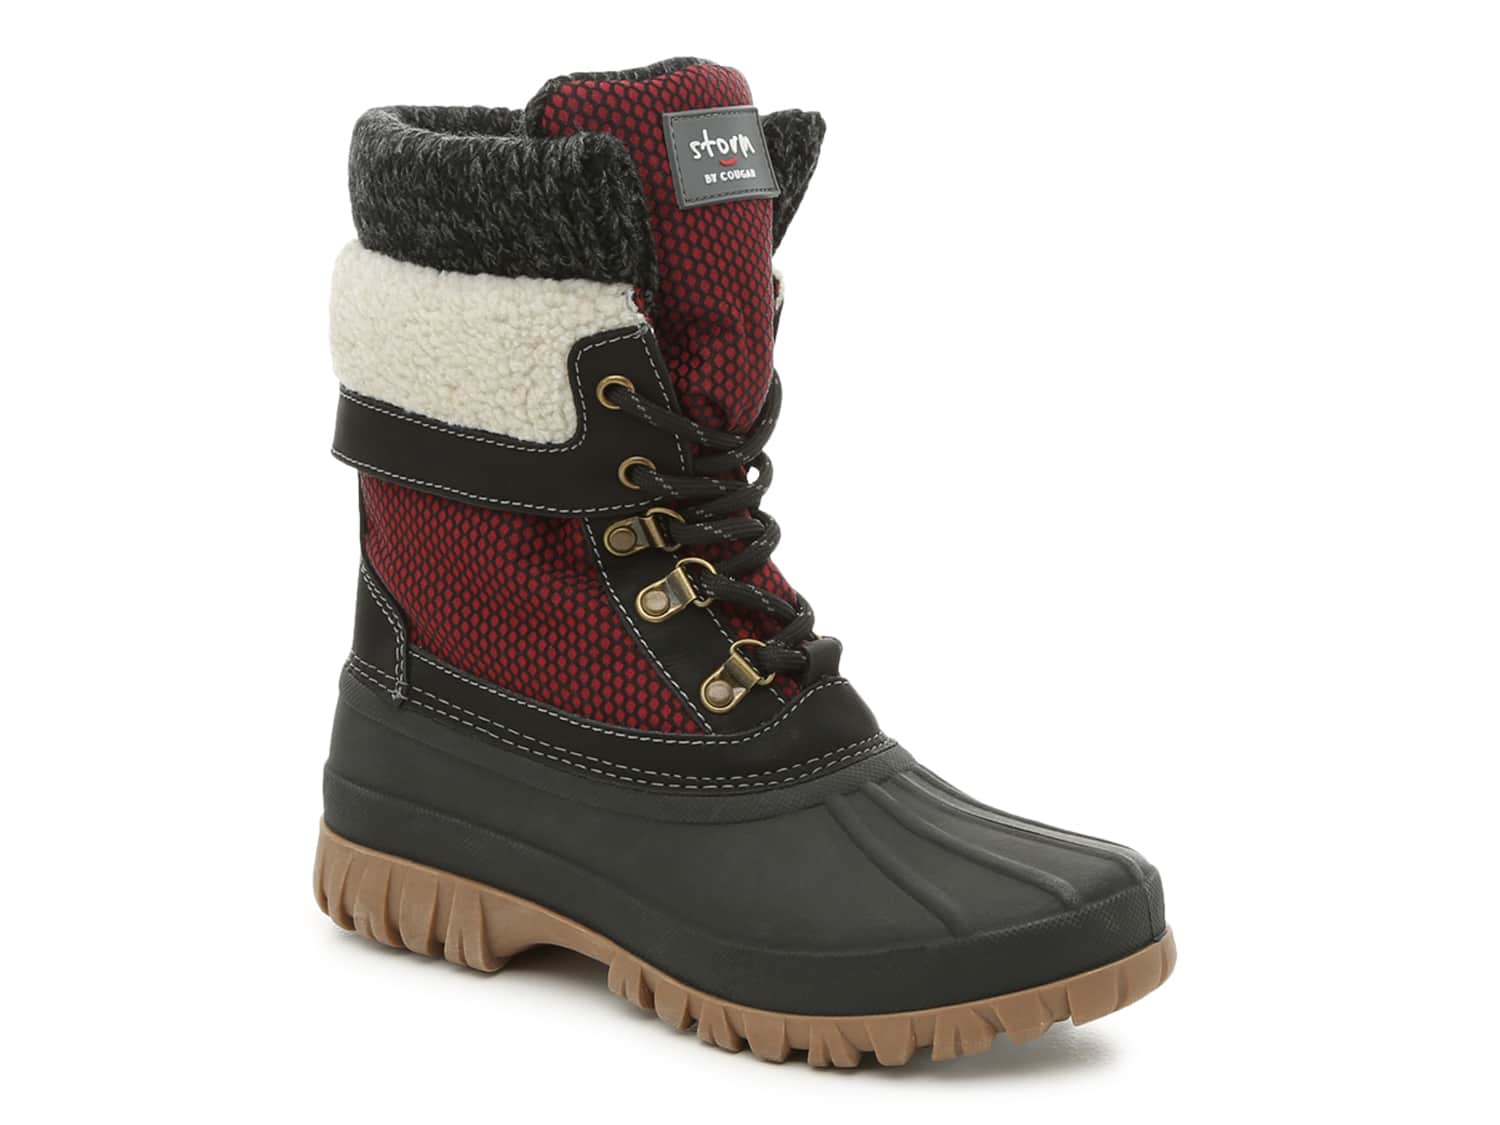 Cougar Creek Snow Boot - Free Shipping | DSW